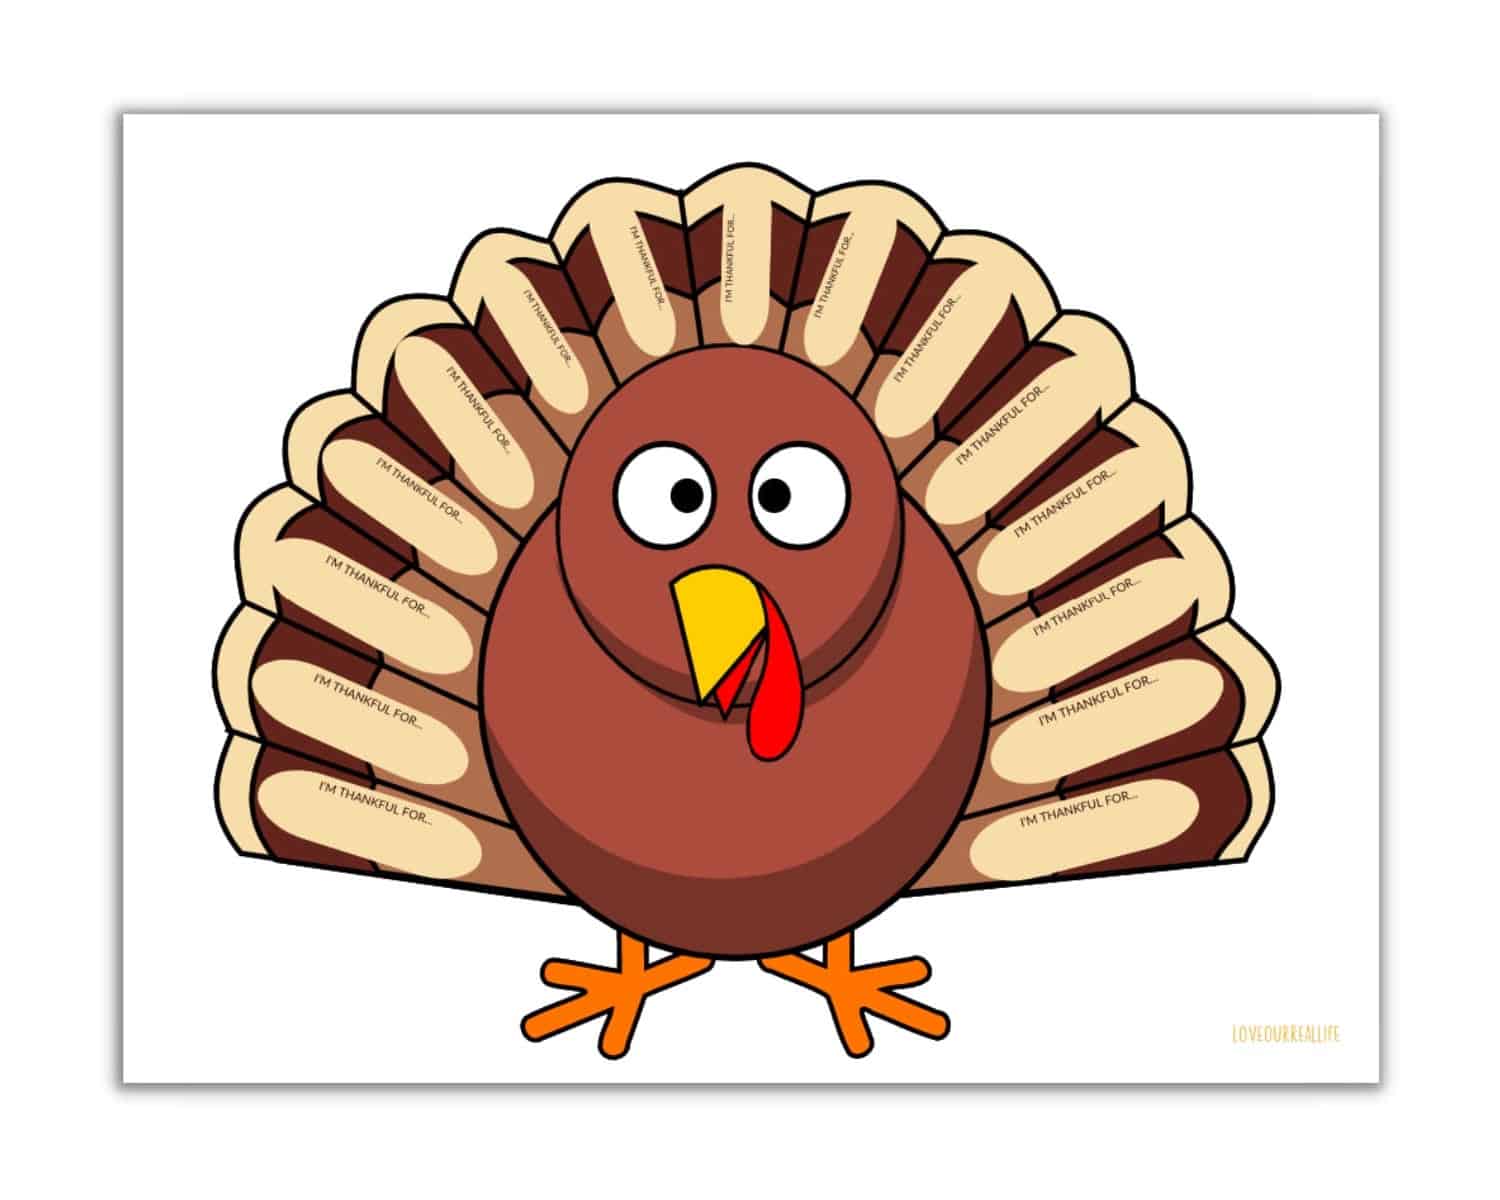 Thankful turkey cartoon character with space on each back feather to write messages of thanksgiving.